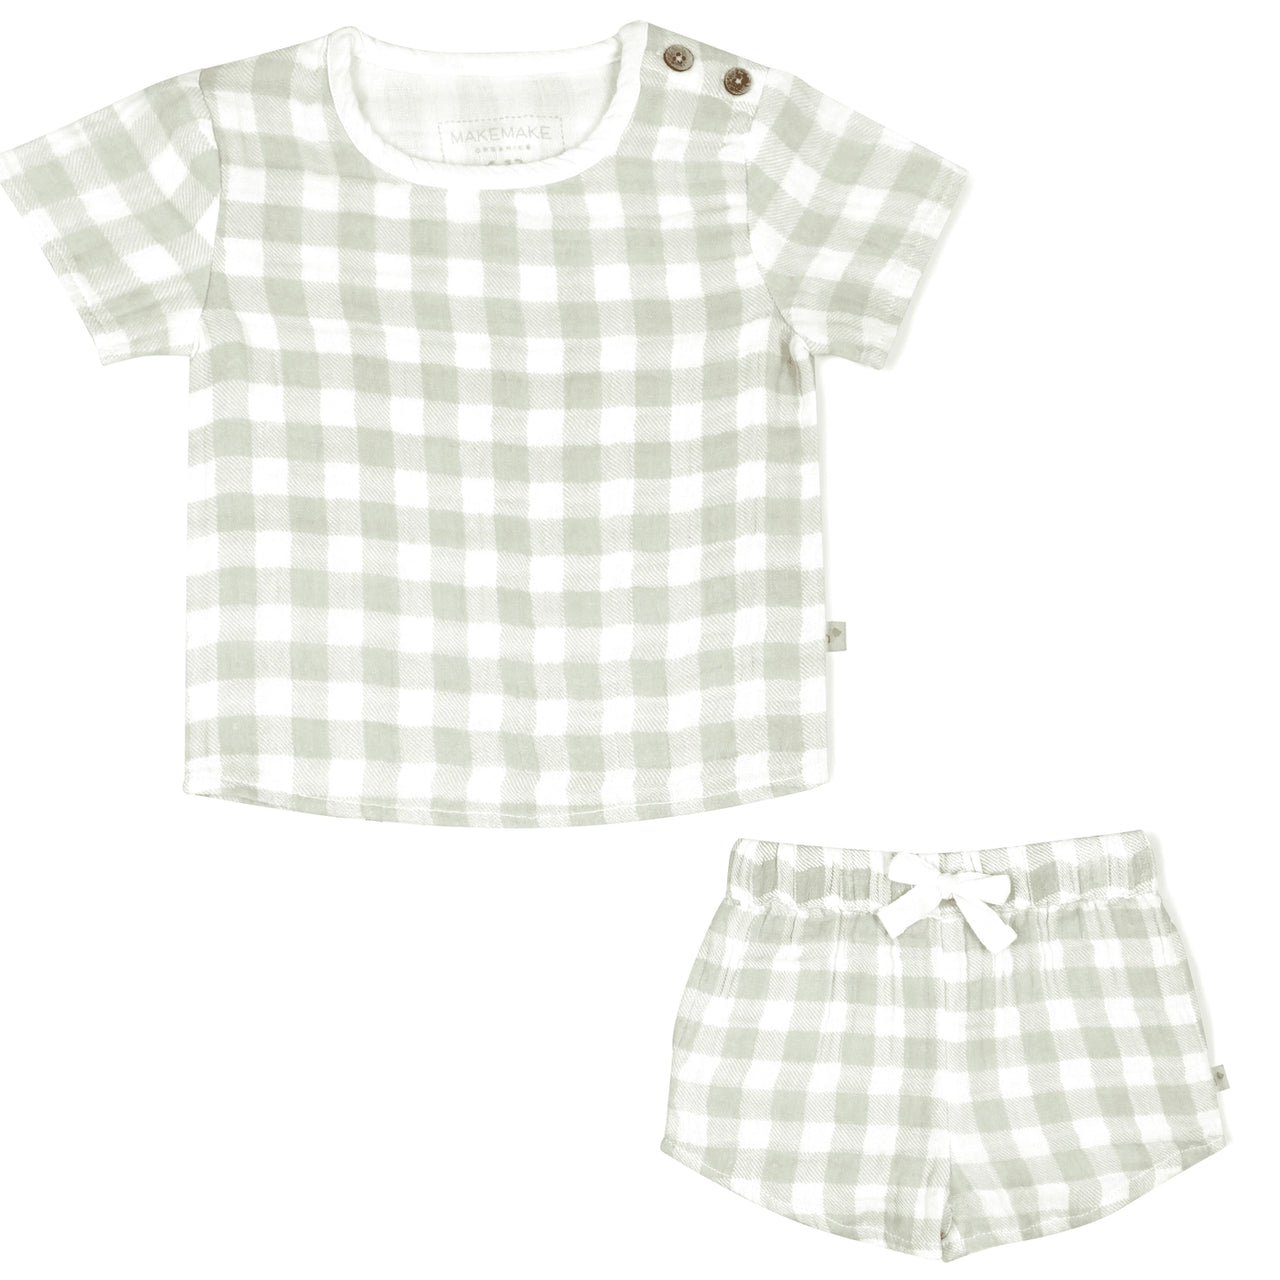 Organic Top and Shorts Set- Gingham